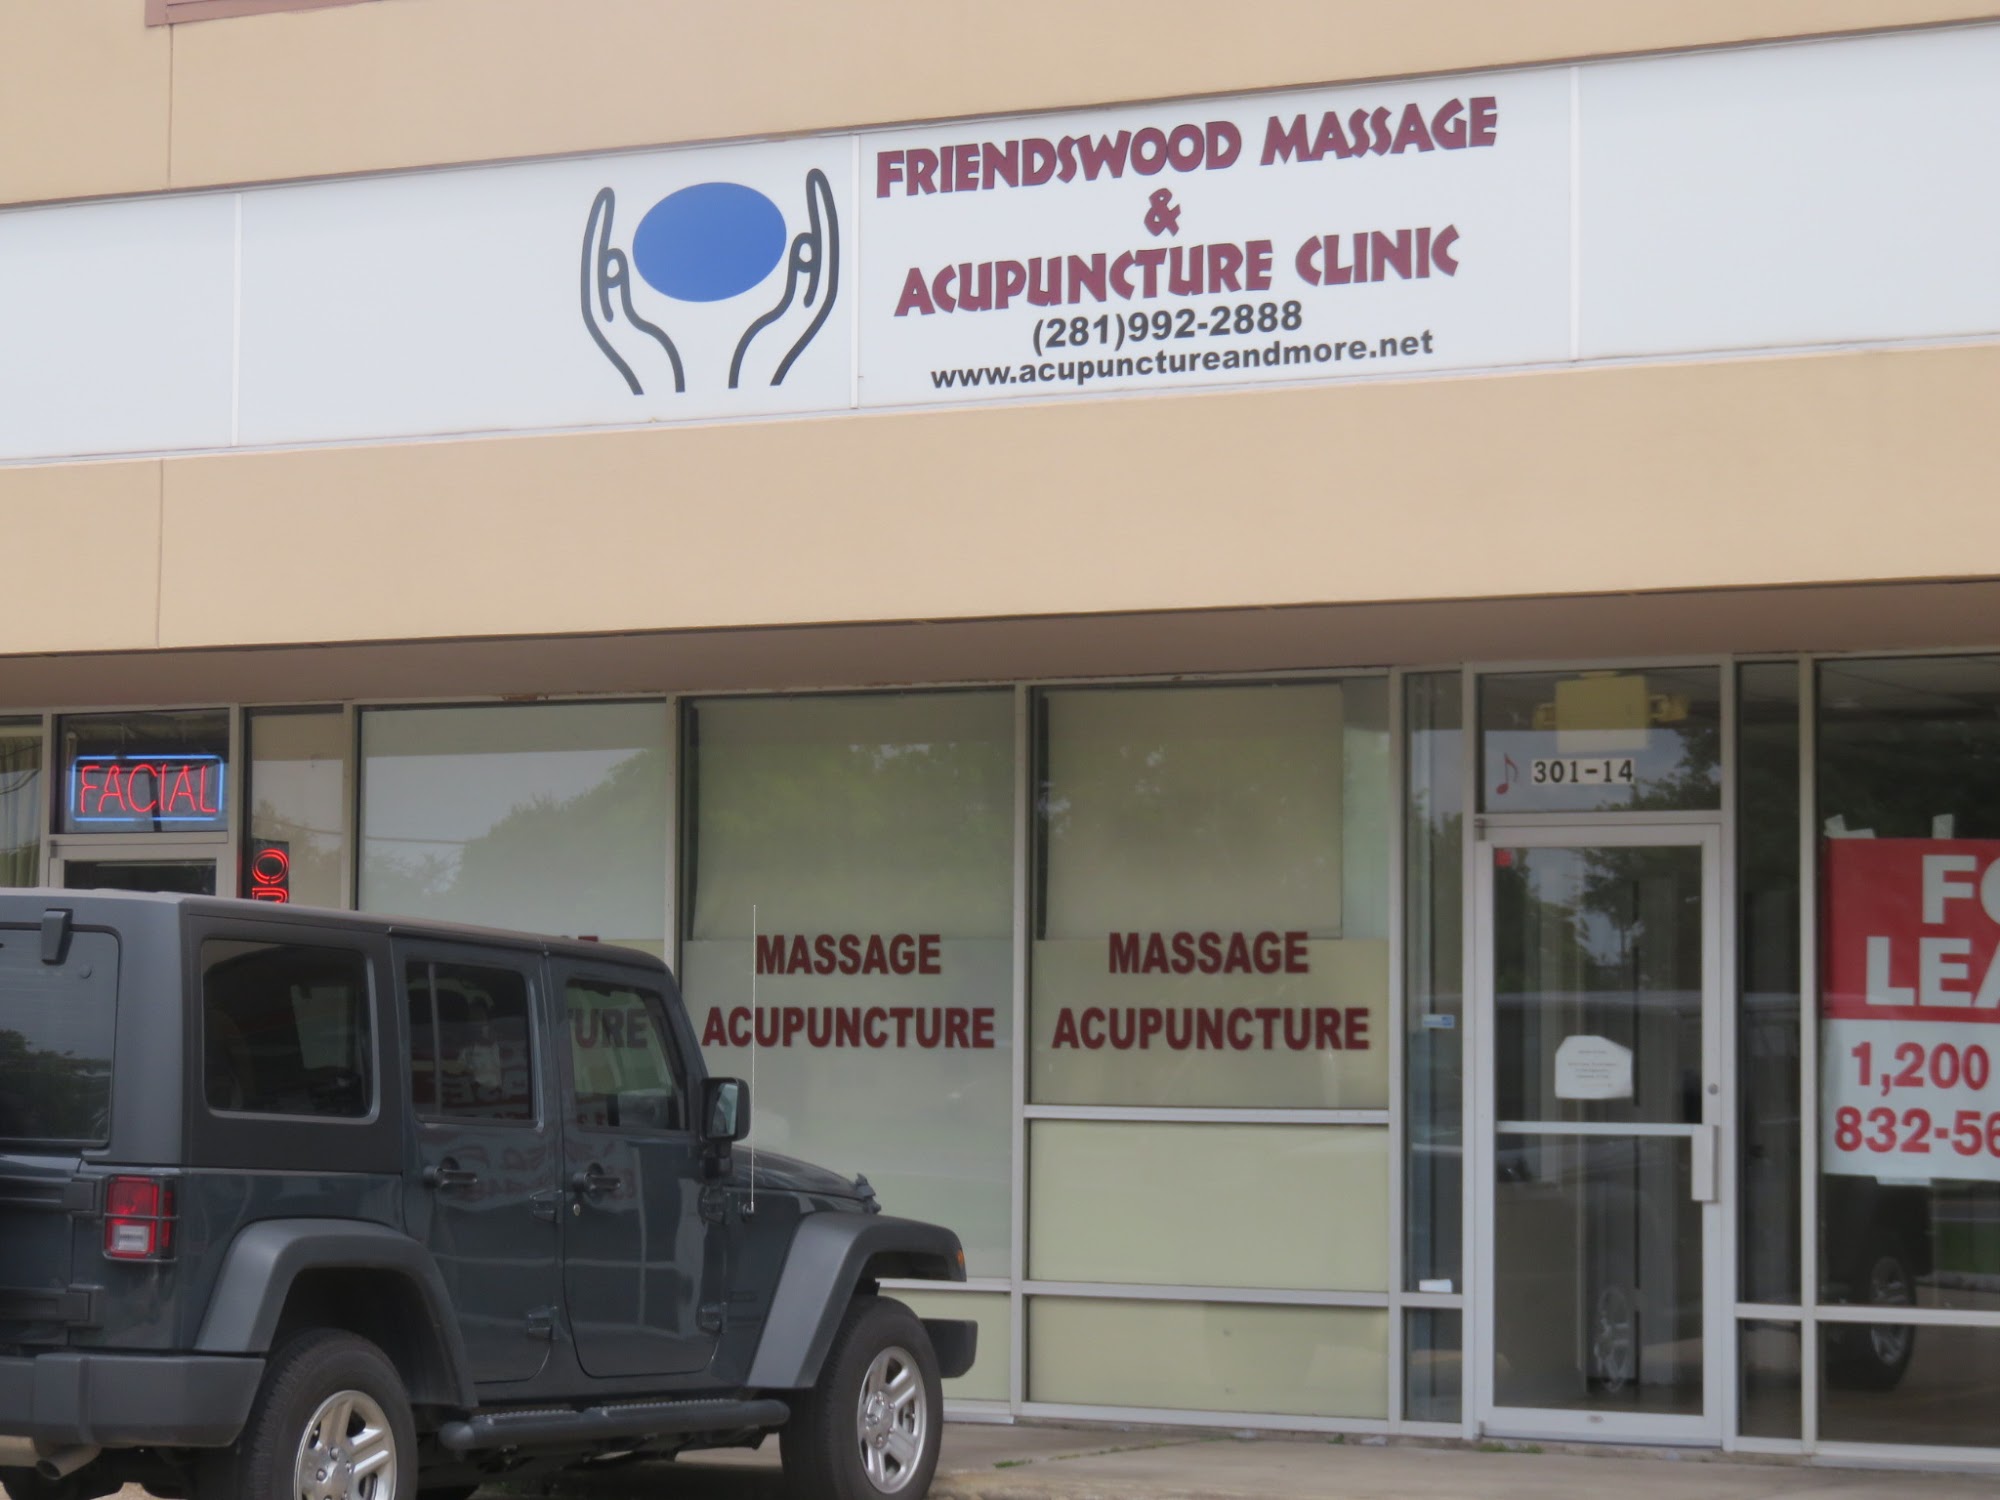 Friendswood Massage & Acupuncture Clinic